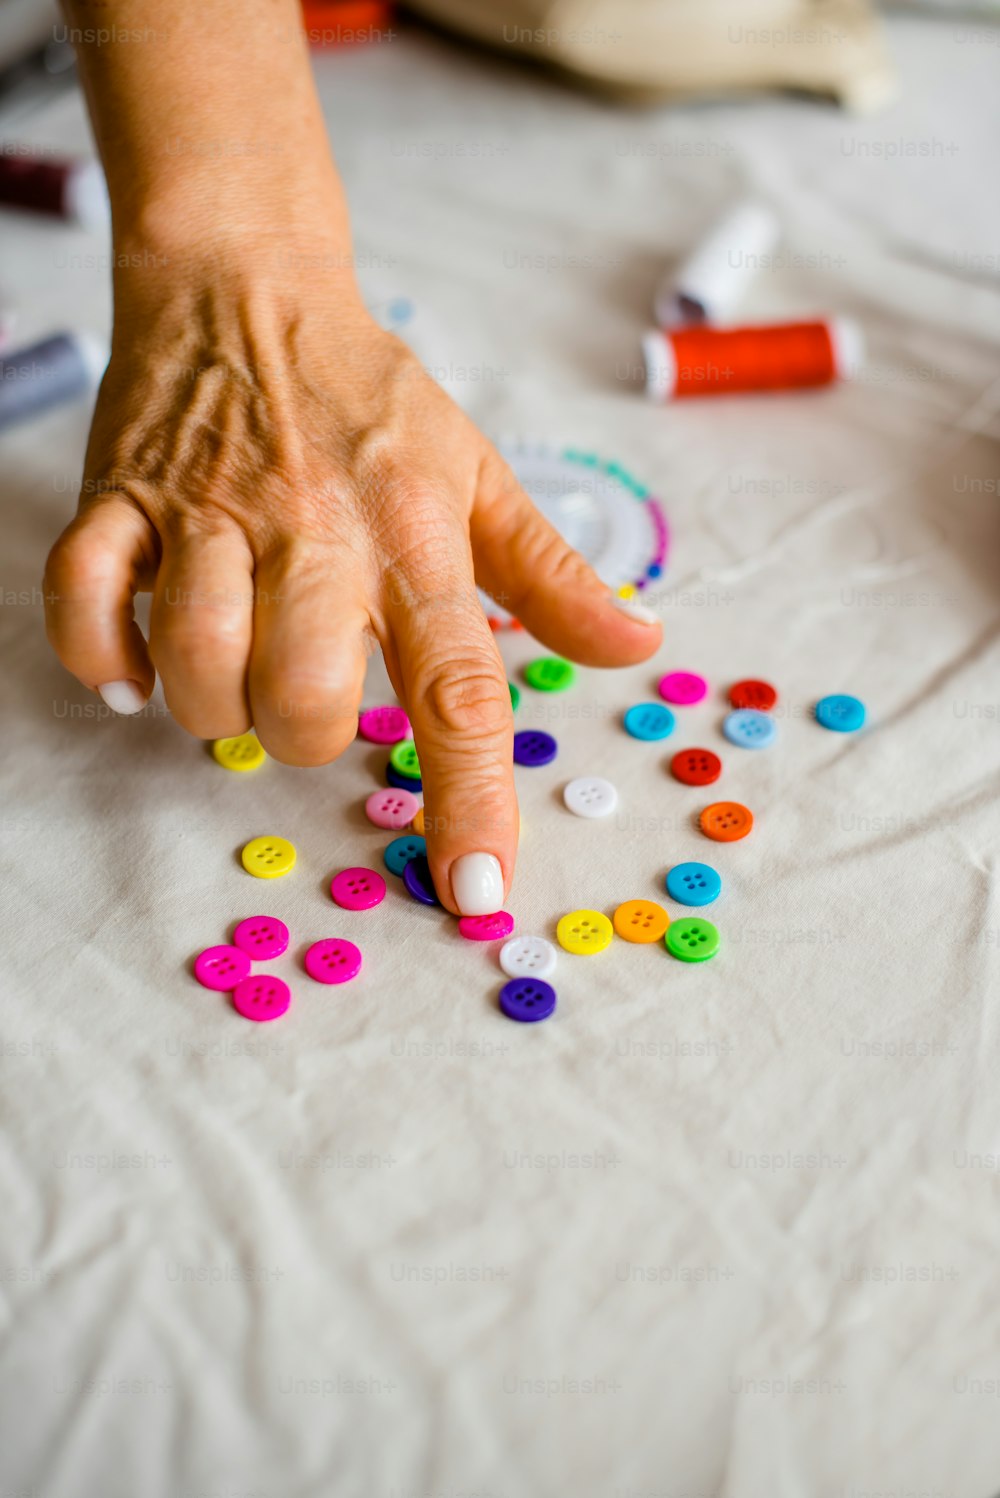 a person's hand reaching for colorful buttons on a table